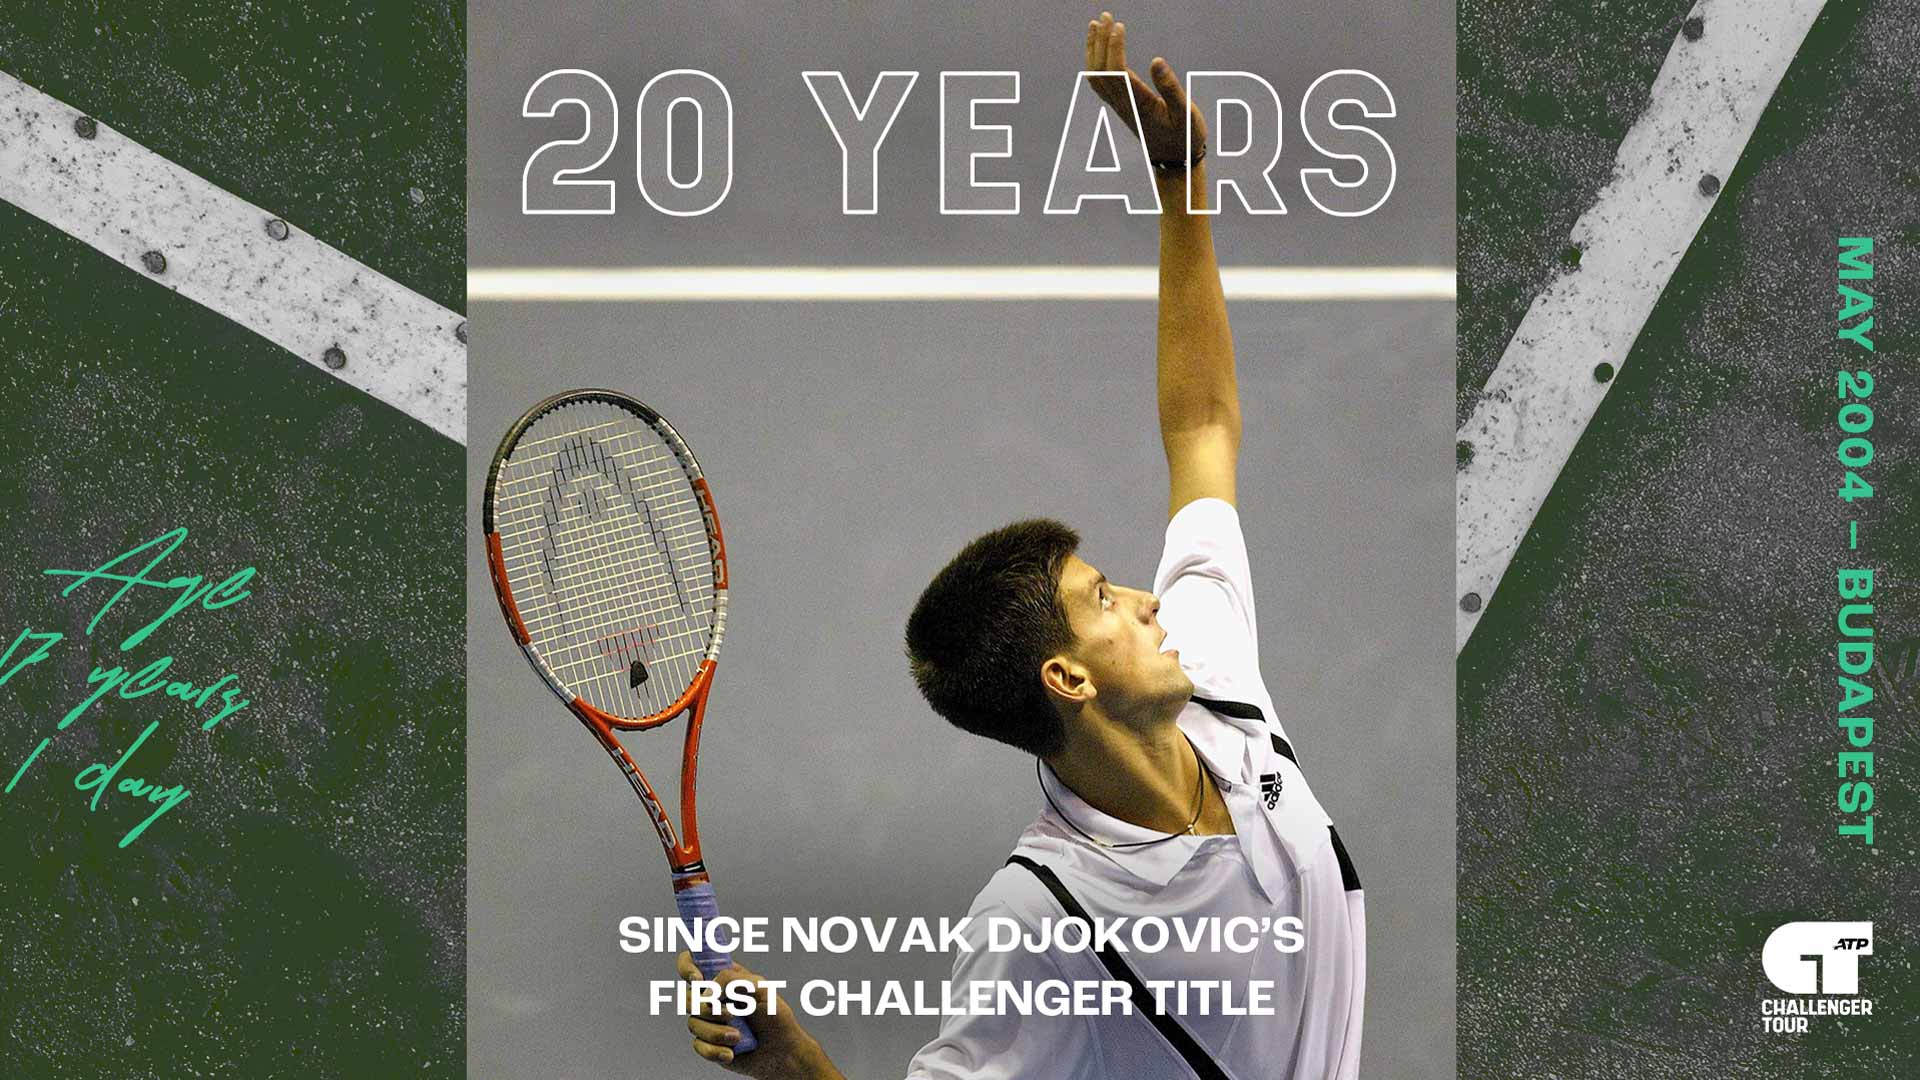 Novak Djokovic won his first ATP Challenger Tour title in May 2004 in Budapest, Hungary.